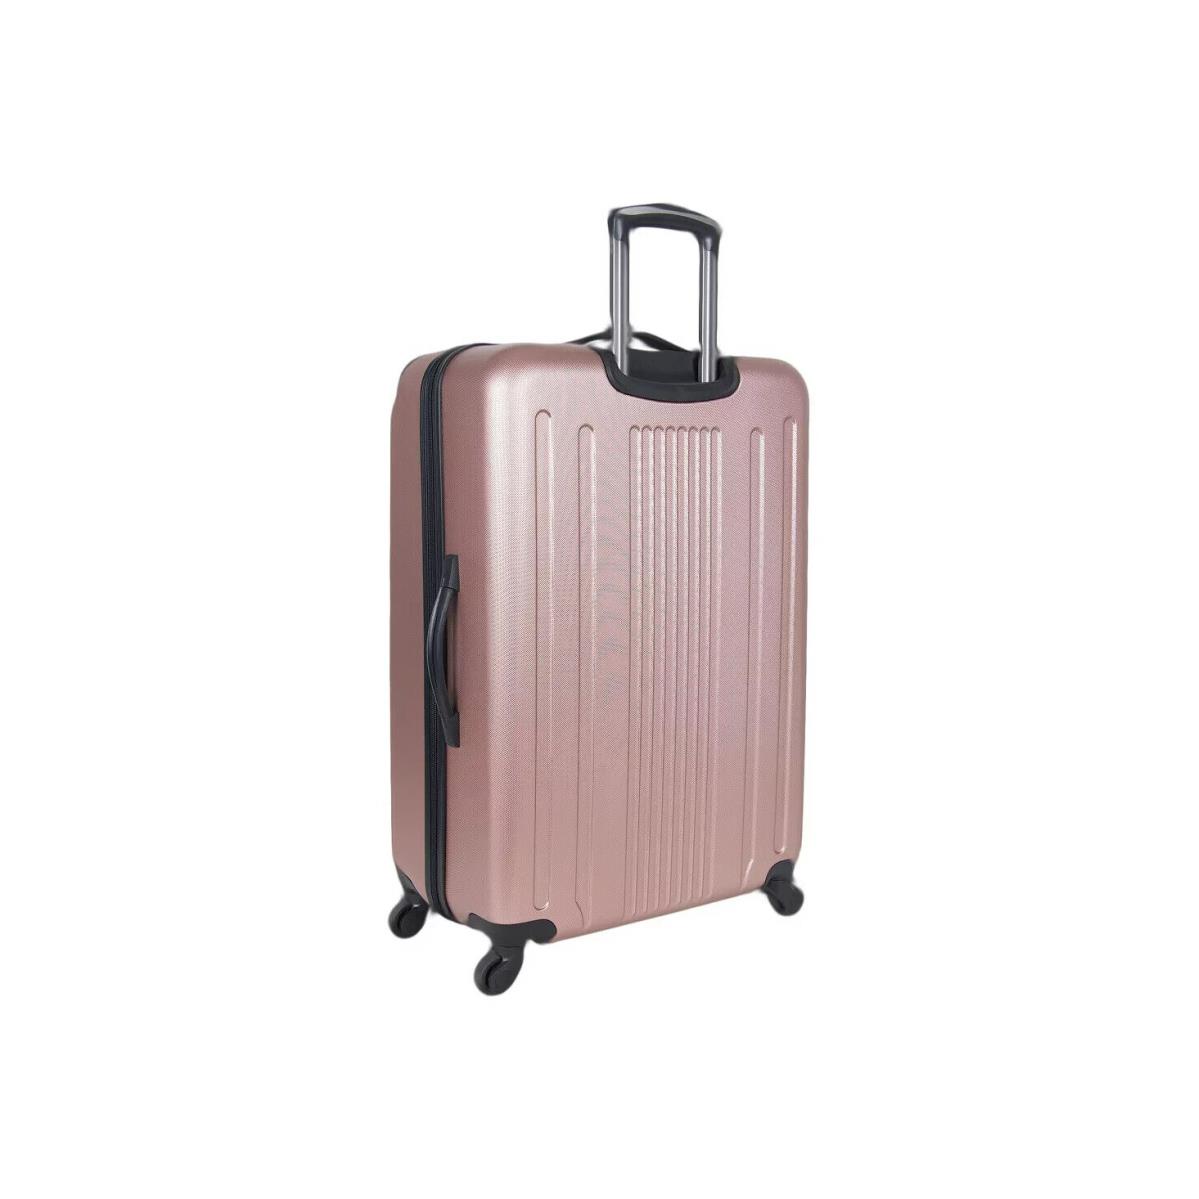 Kenneth Cole Reaction South Street Hardside Luggage Rose Gold 24